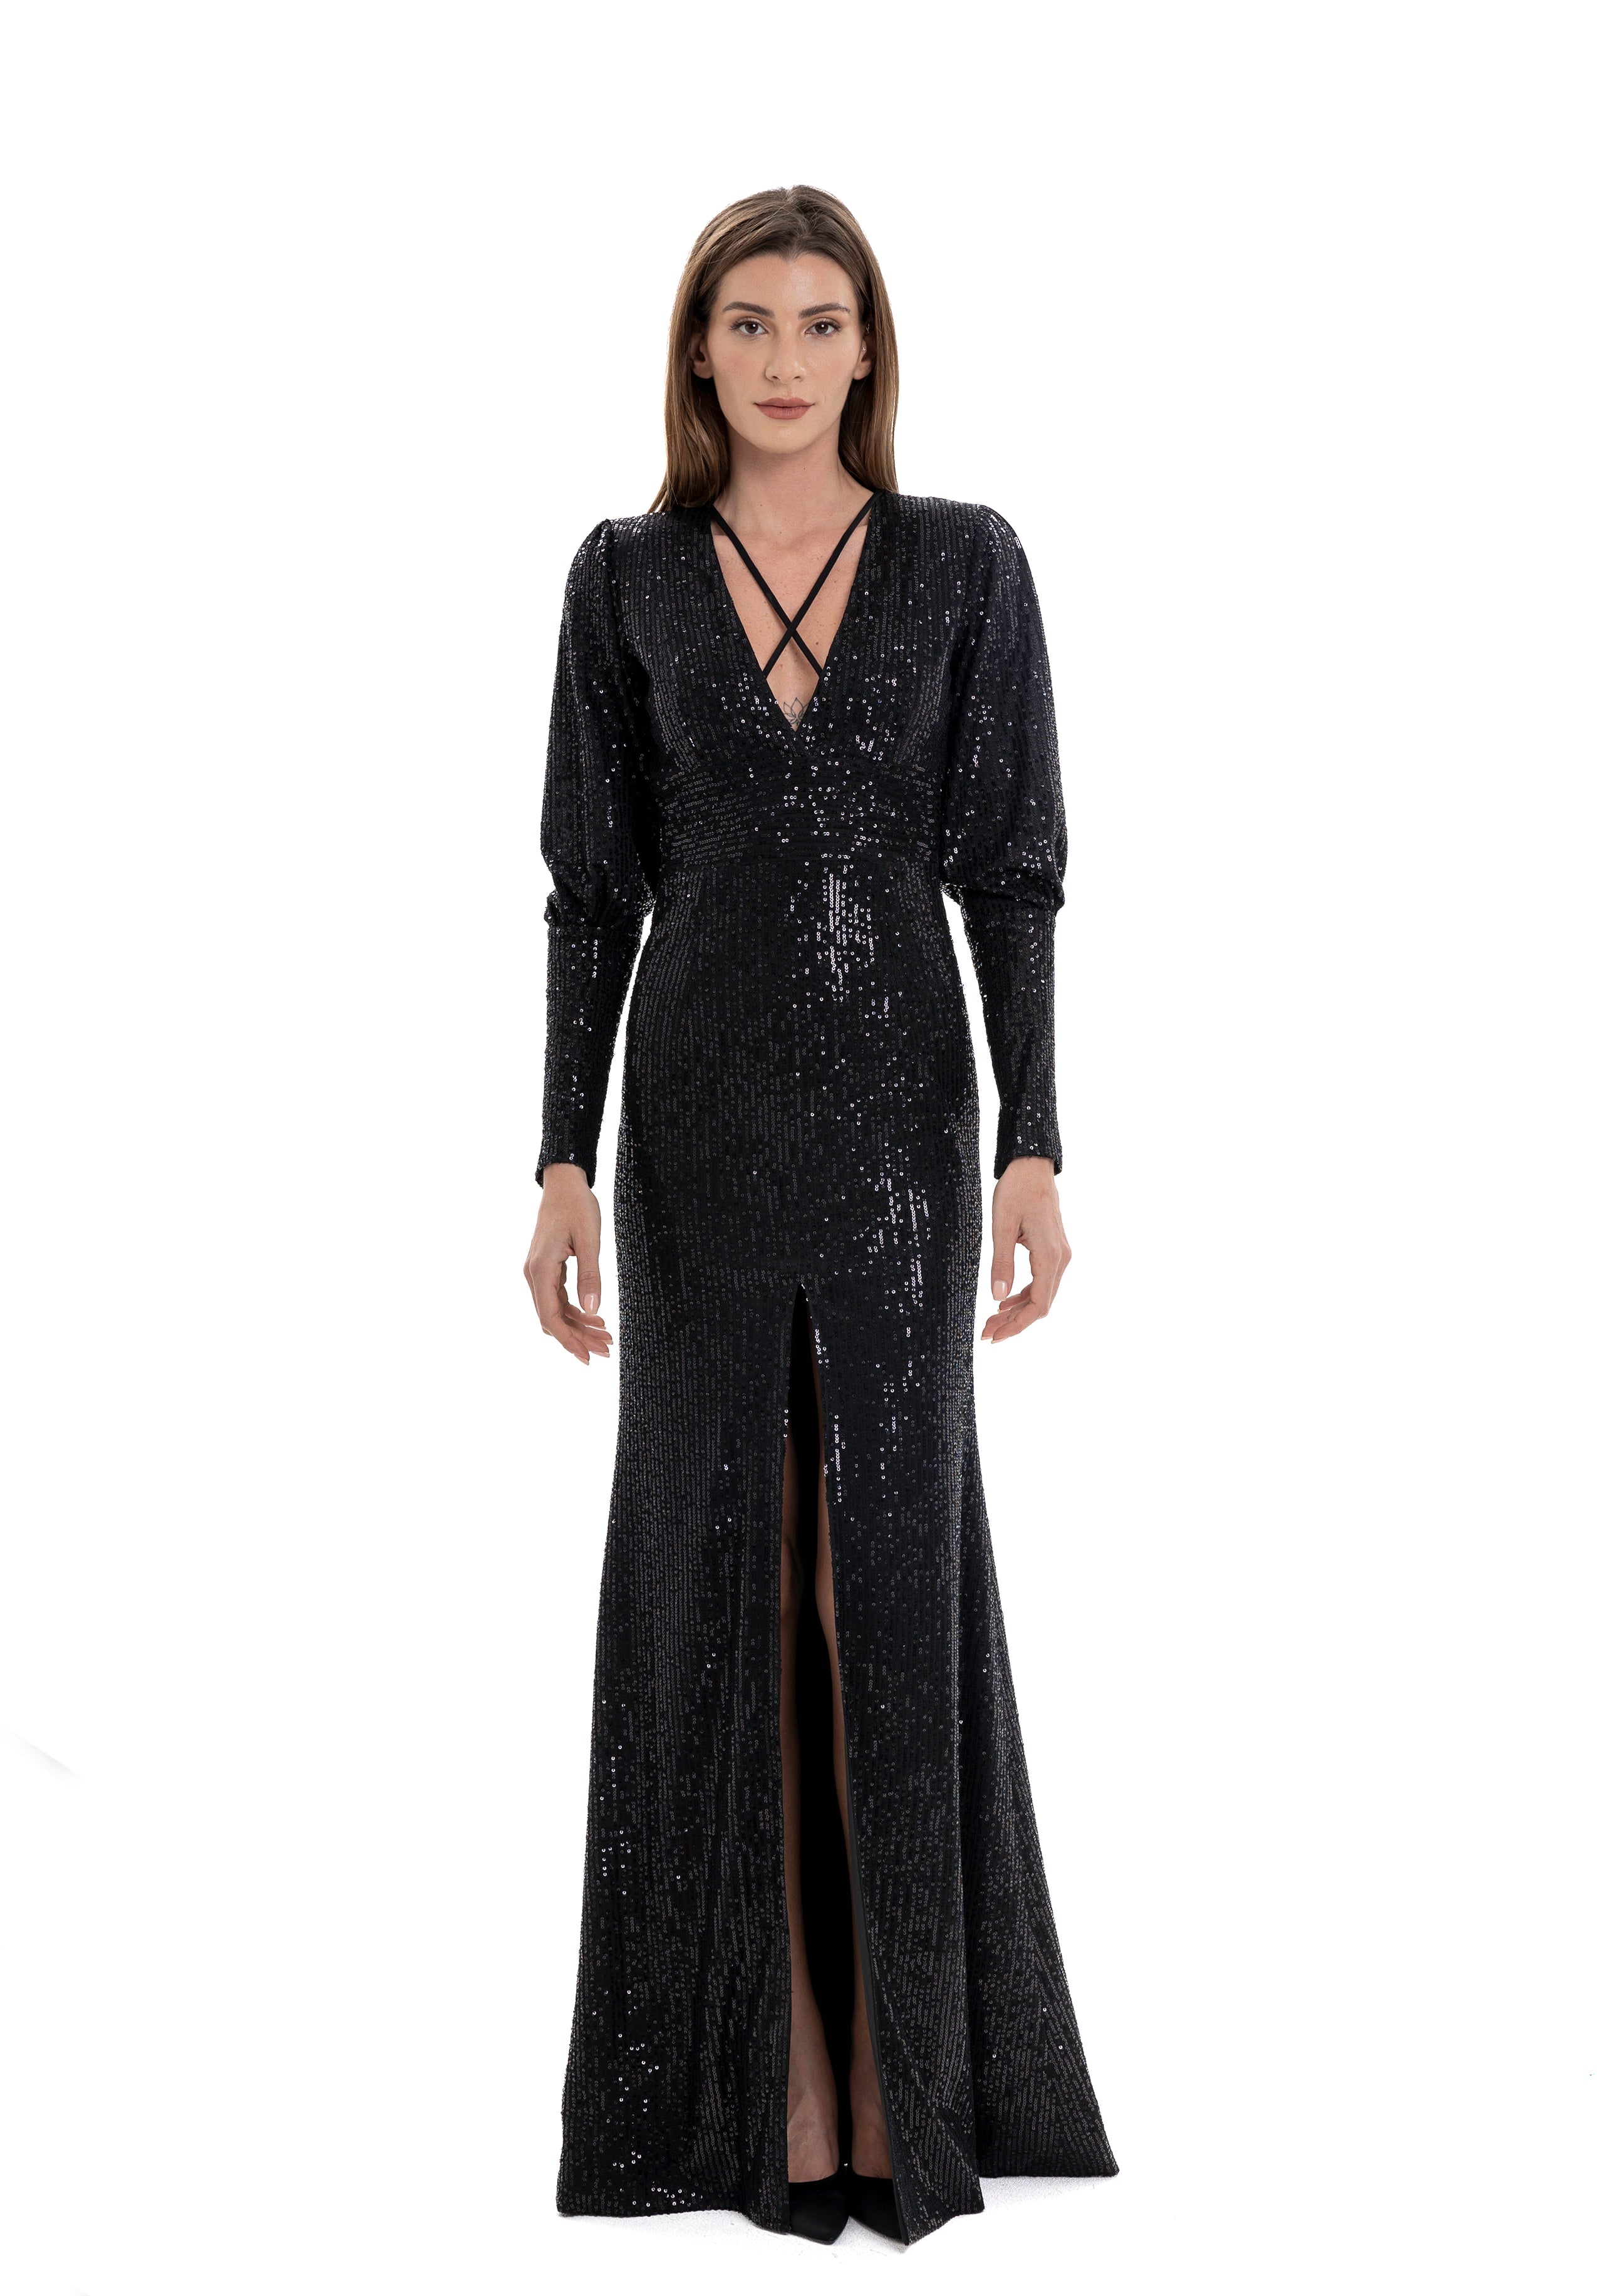 The Glam Long Sequin Dress By Lili Blanc